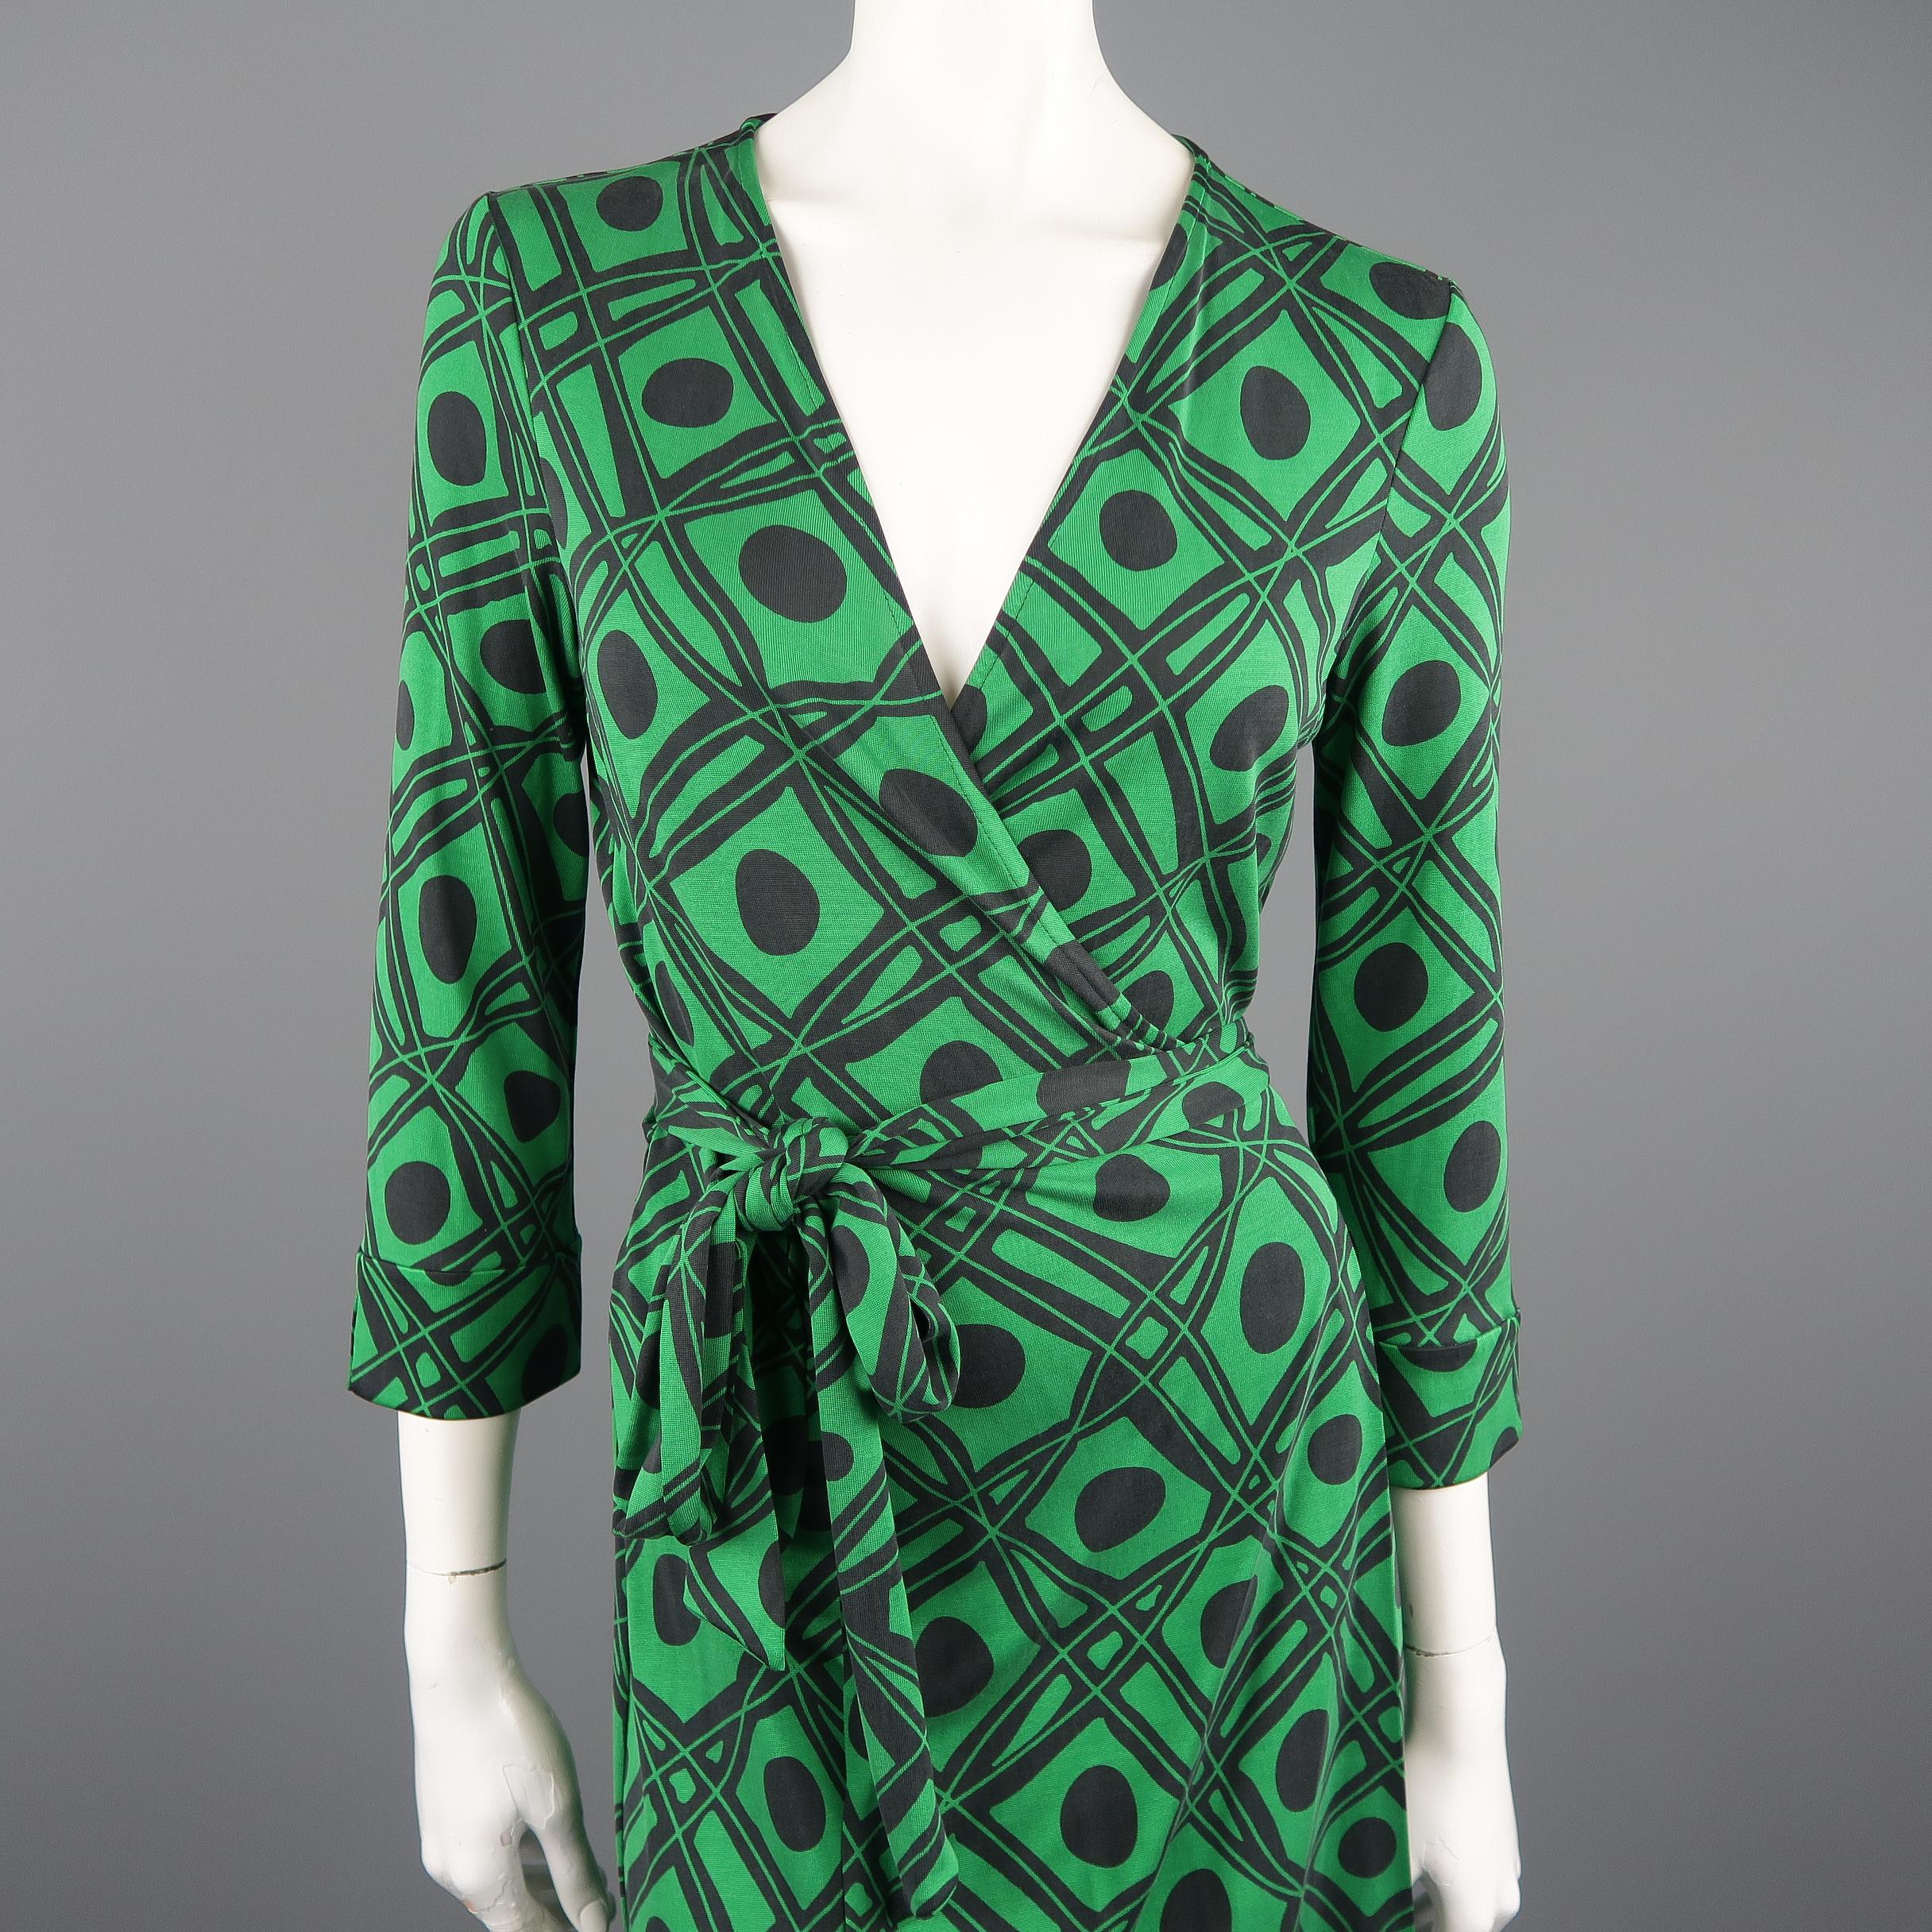 DIANE VON FURSTENBERG Vintage wrap dress comes in green and black retro geometric print silk jersey with a deep v neck, adjustable wrapped tie closure, and slit cuffed three quarter sleeves.
 
Vintage Pre-Owned Condition.
Marked: 12
 
Measurements:
